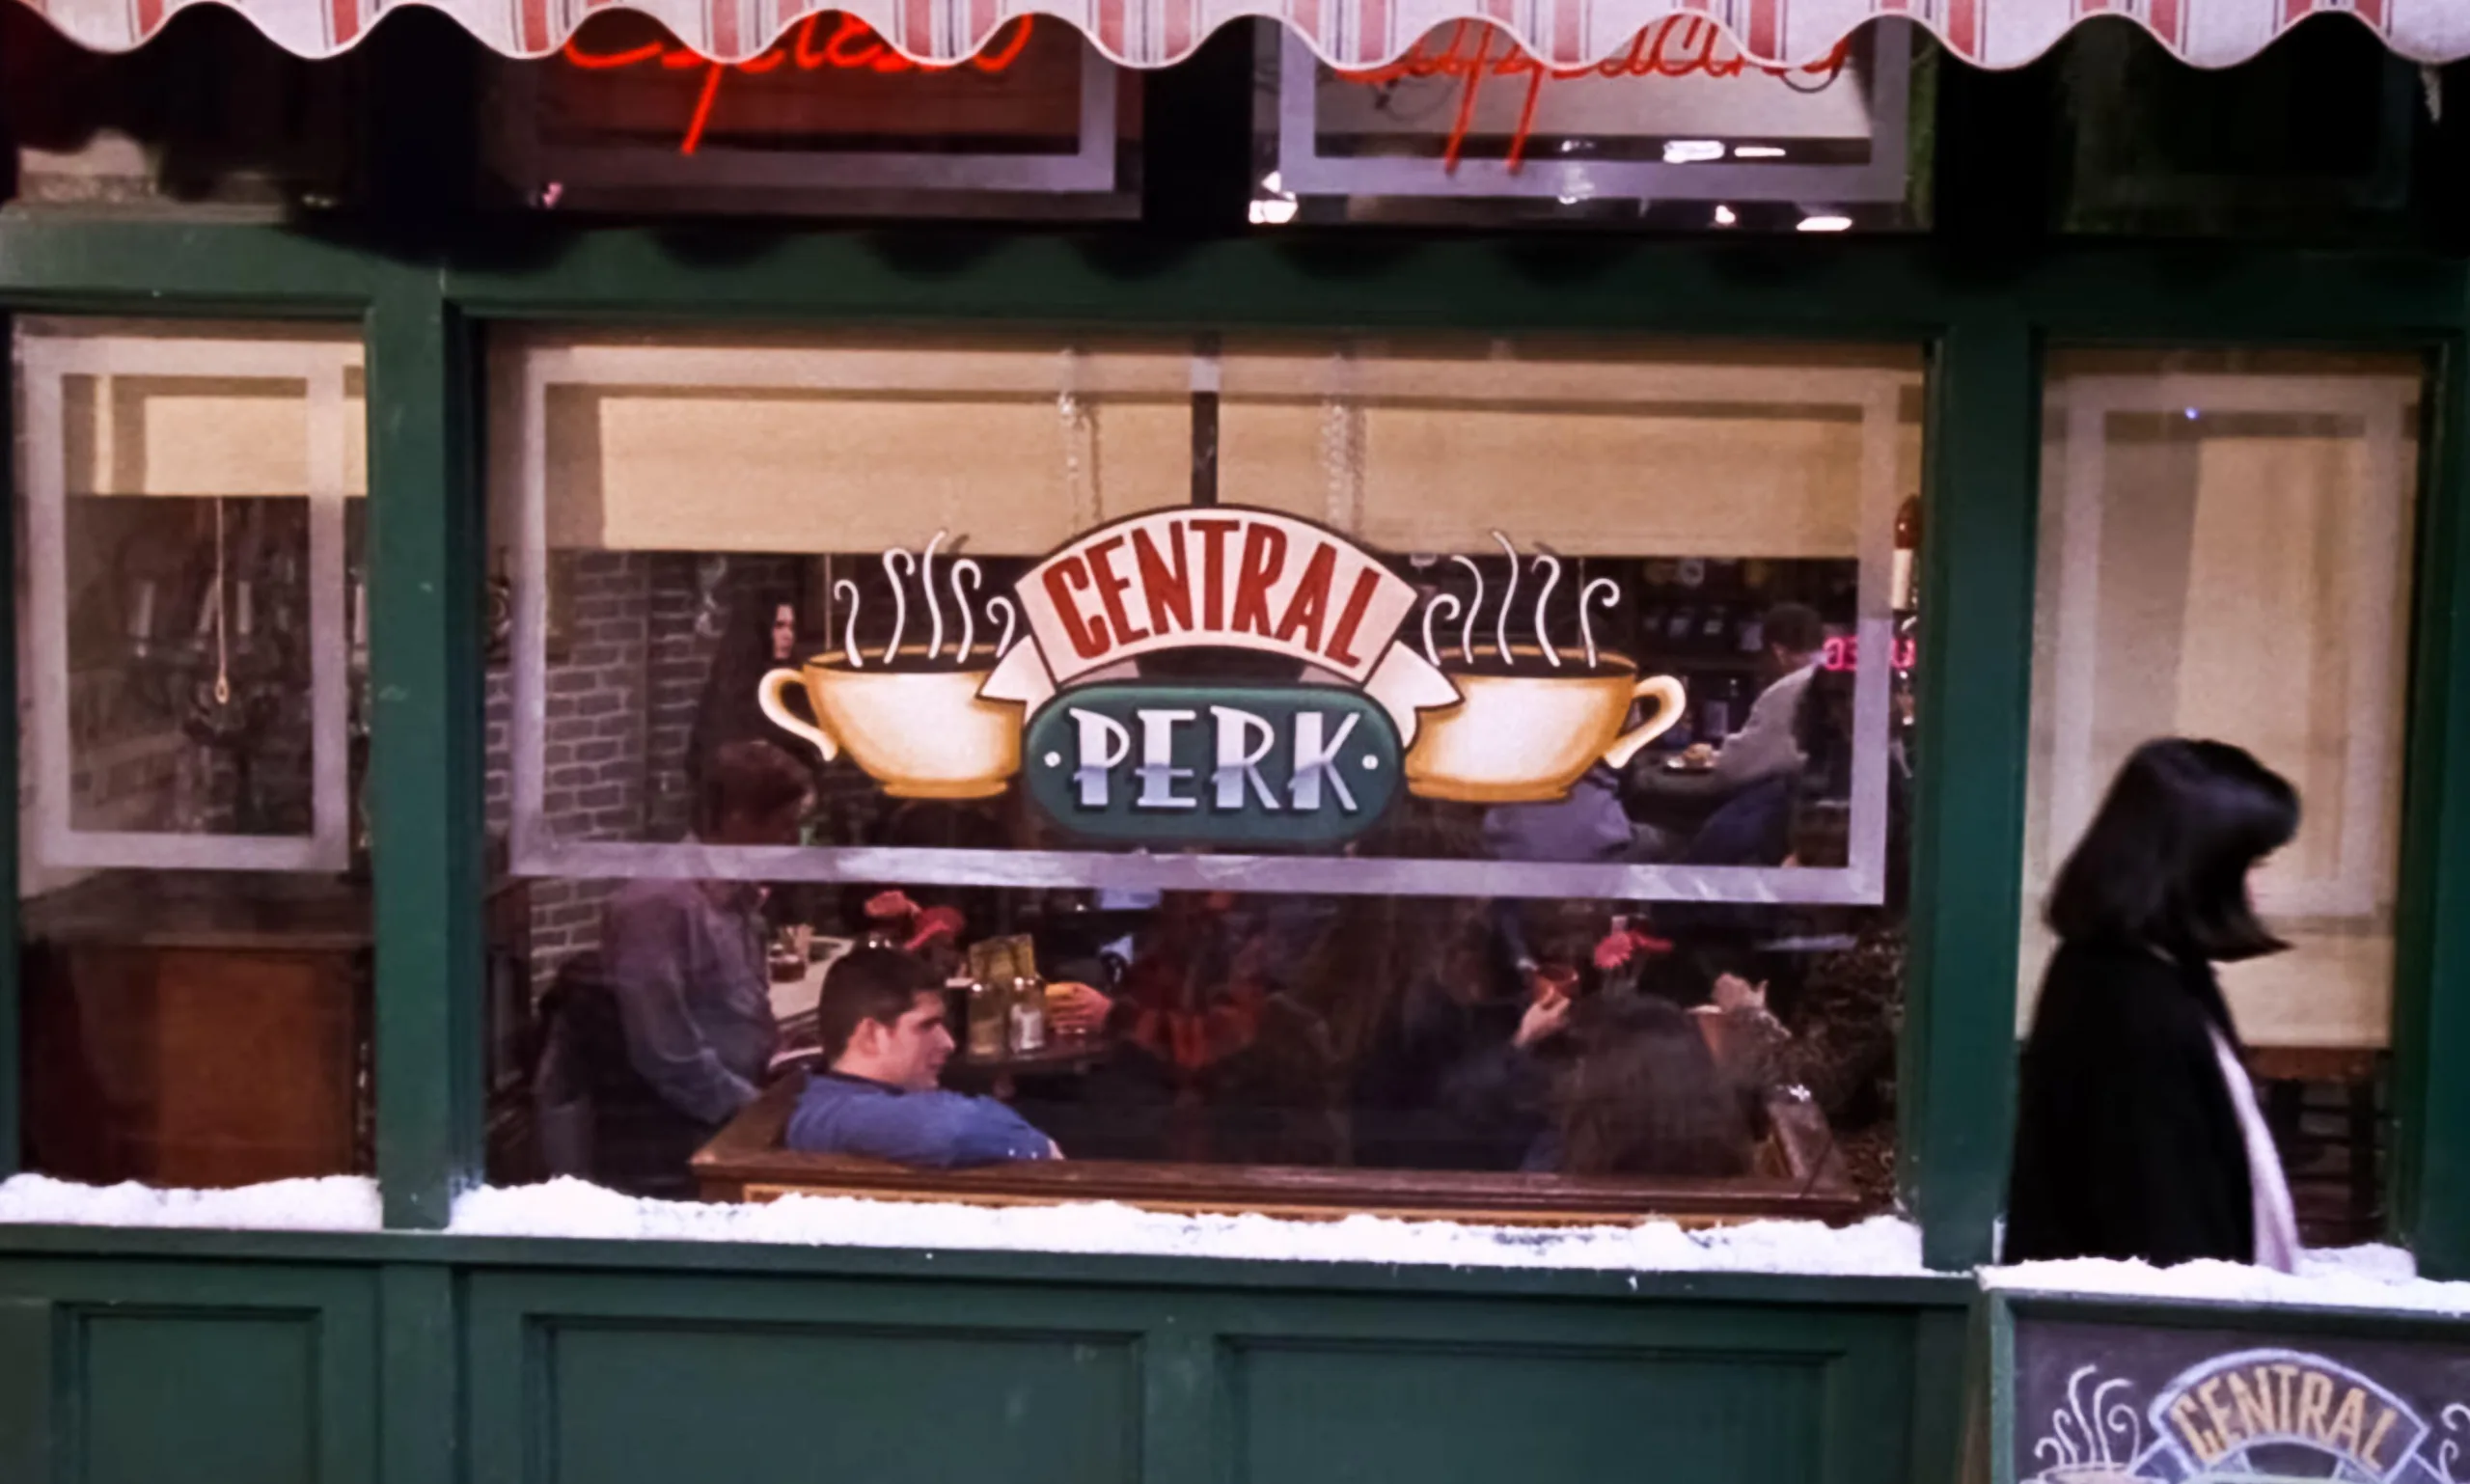 A photograph of the coffee shop in Friends that has a sign "central park" with green frames and snow on windowsill. People are inside sitting on the sofas.